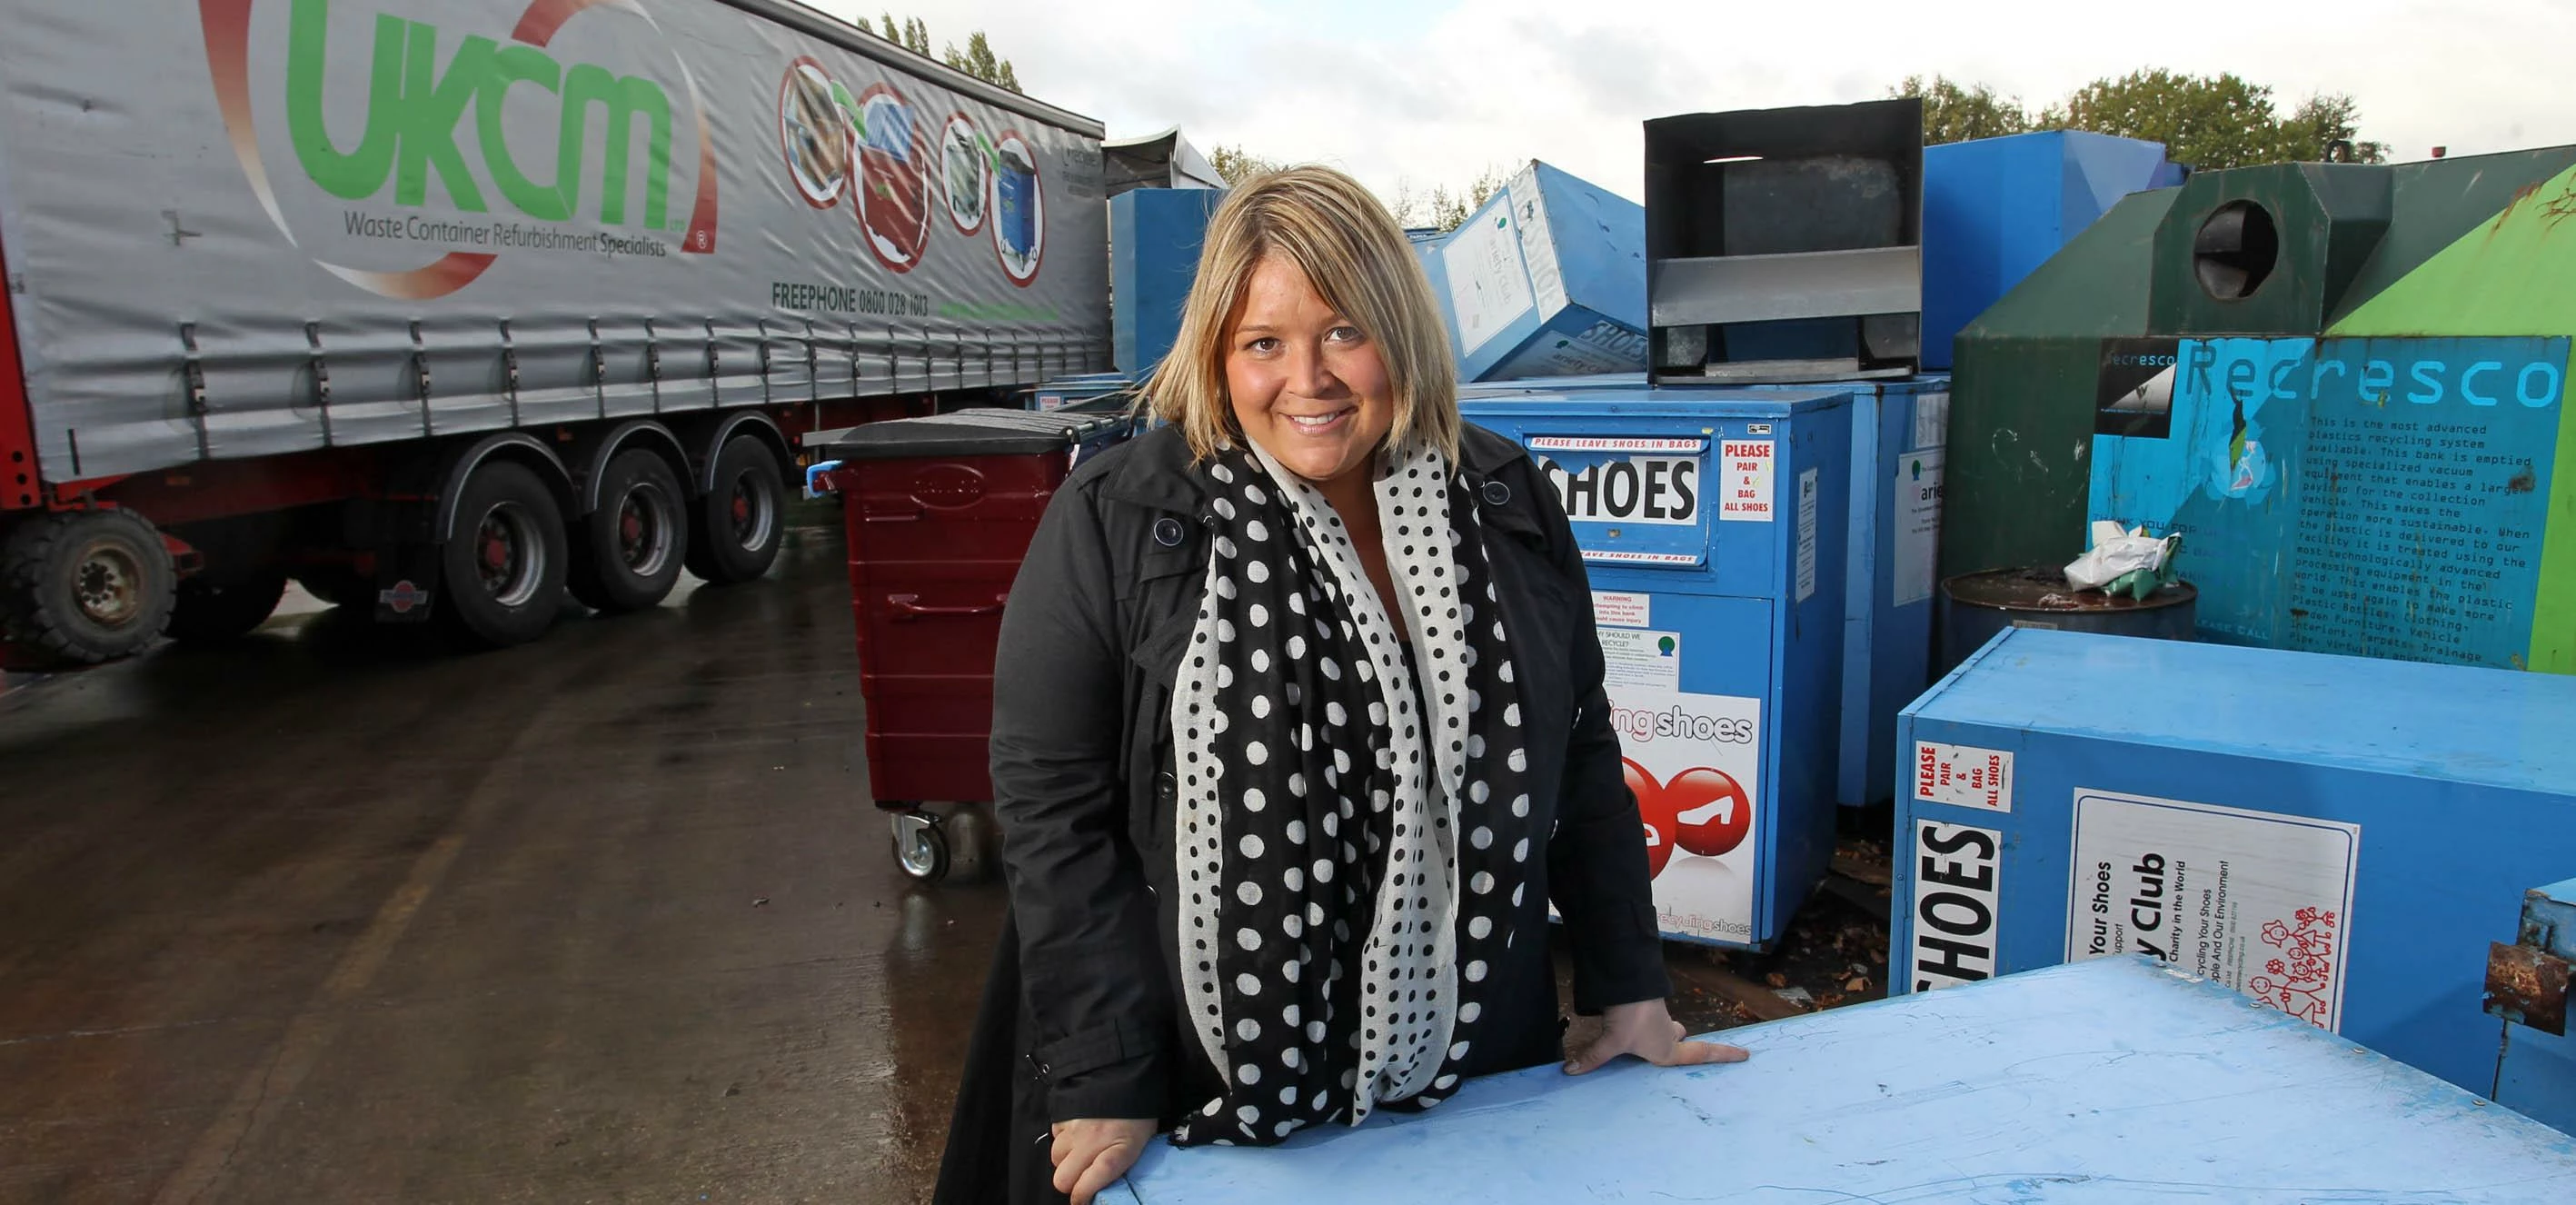 Emma Elston MBE, co-founder and director of UK Container Maintenance 